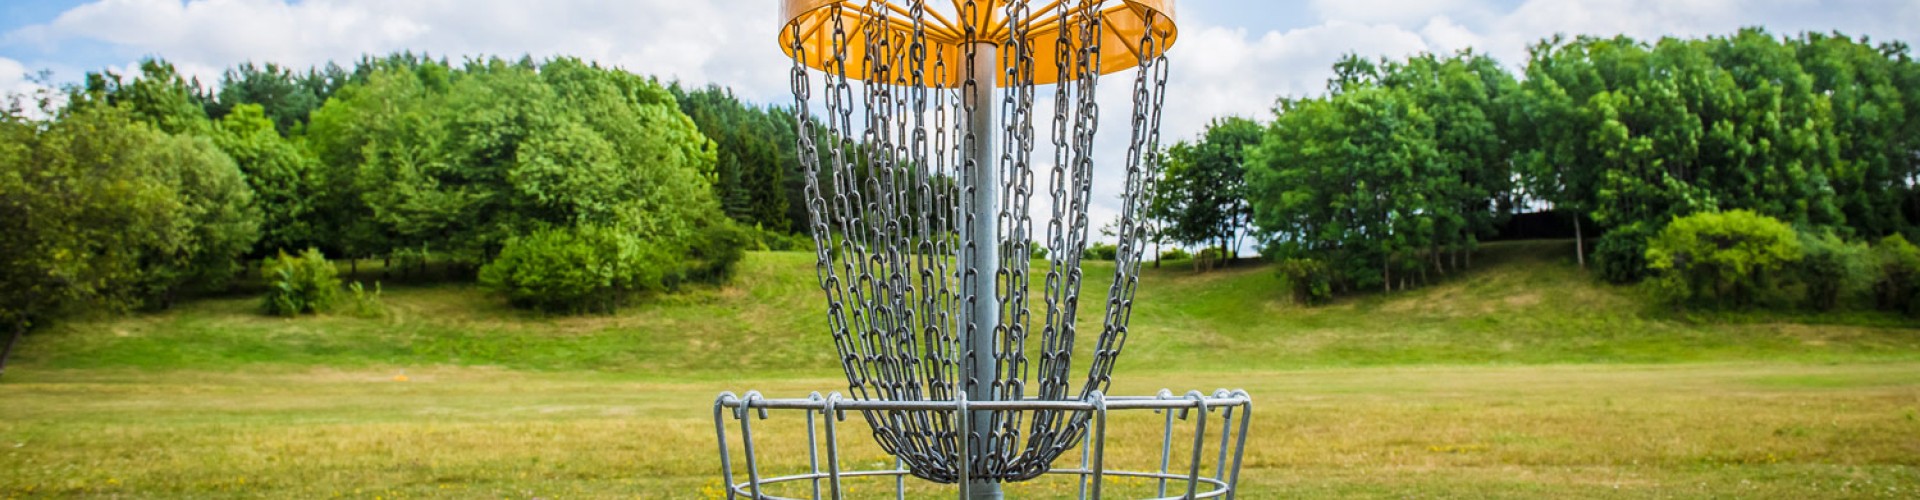 Disc golf basket in the park